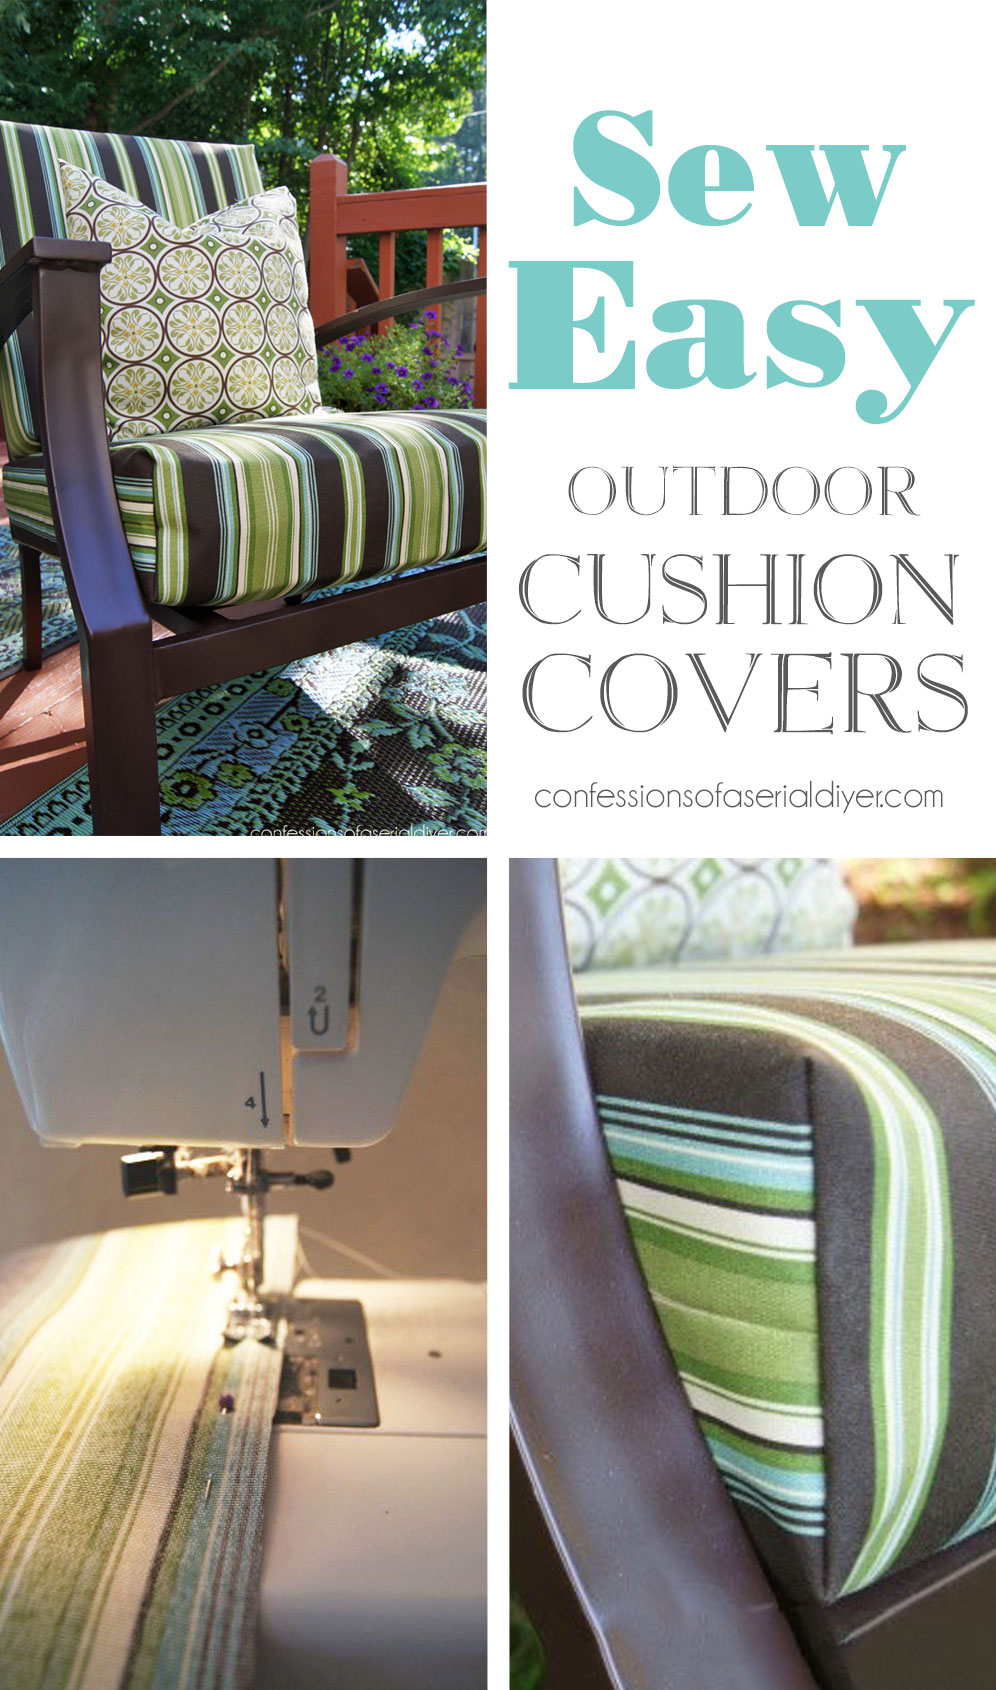 How to Cover Outdoor Cushions